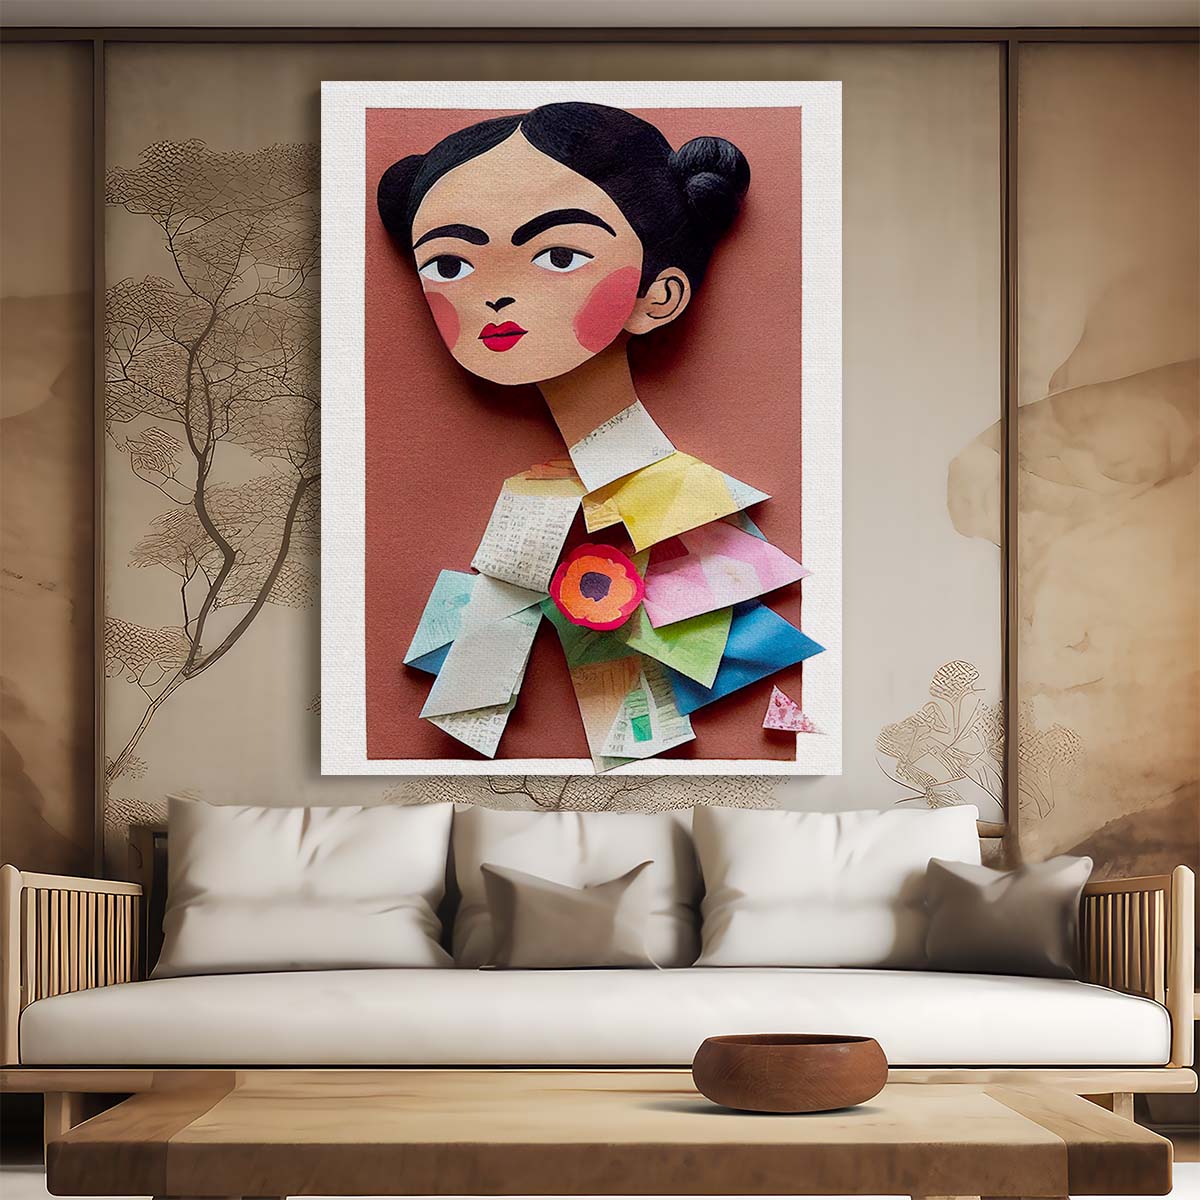 3D Colorful Frida Kahlo Portrait Paper Art by Treechild by Luxuriance Designs, made in USA